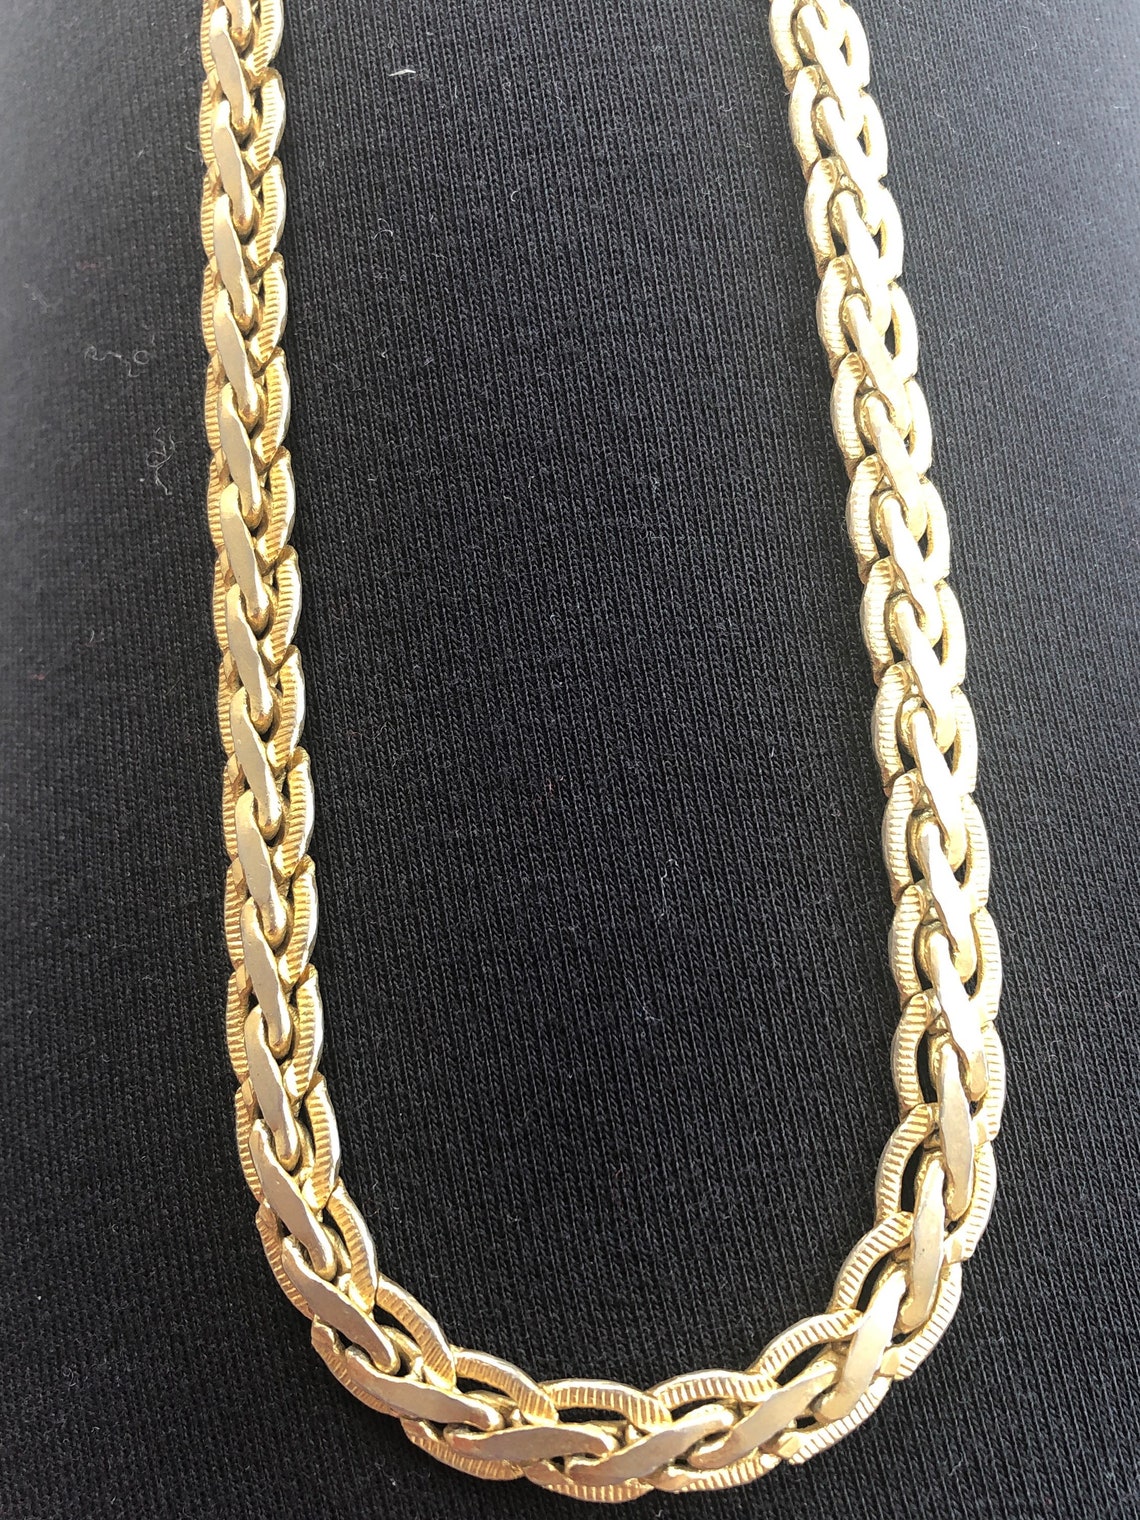 Gilt chain stylish and thick | Etsy